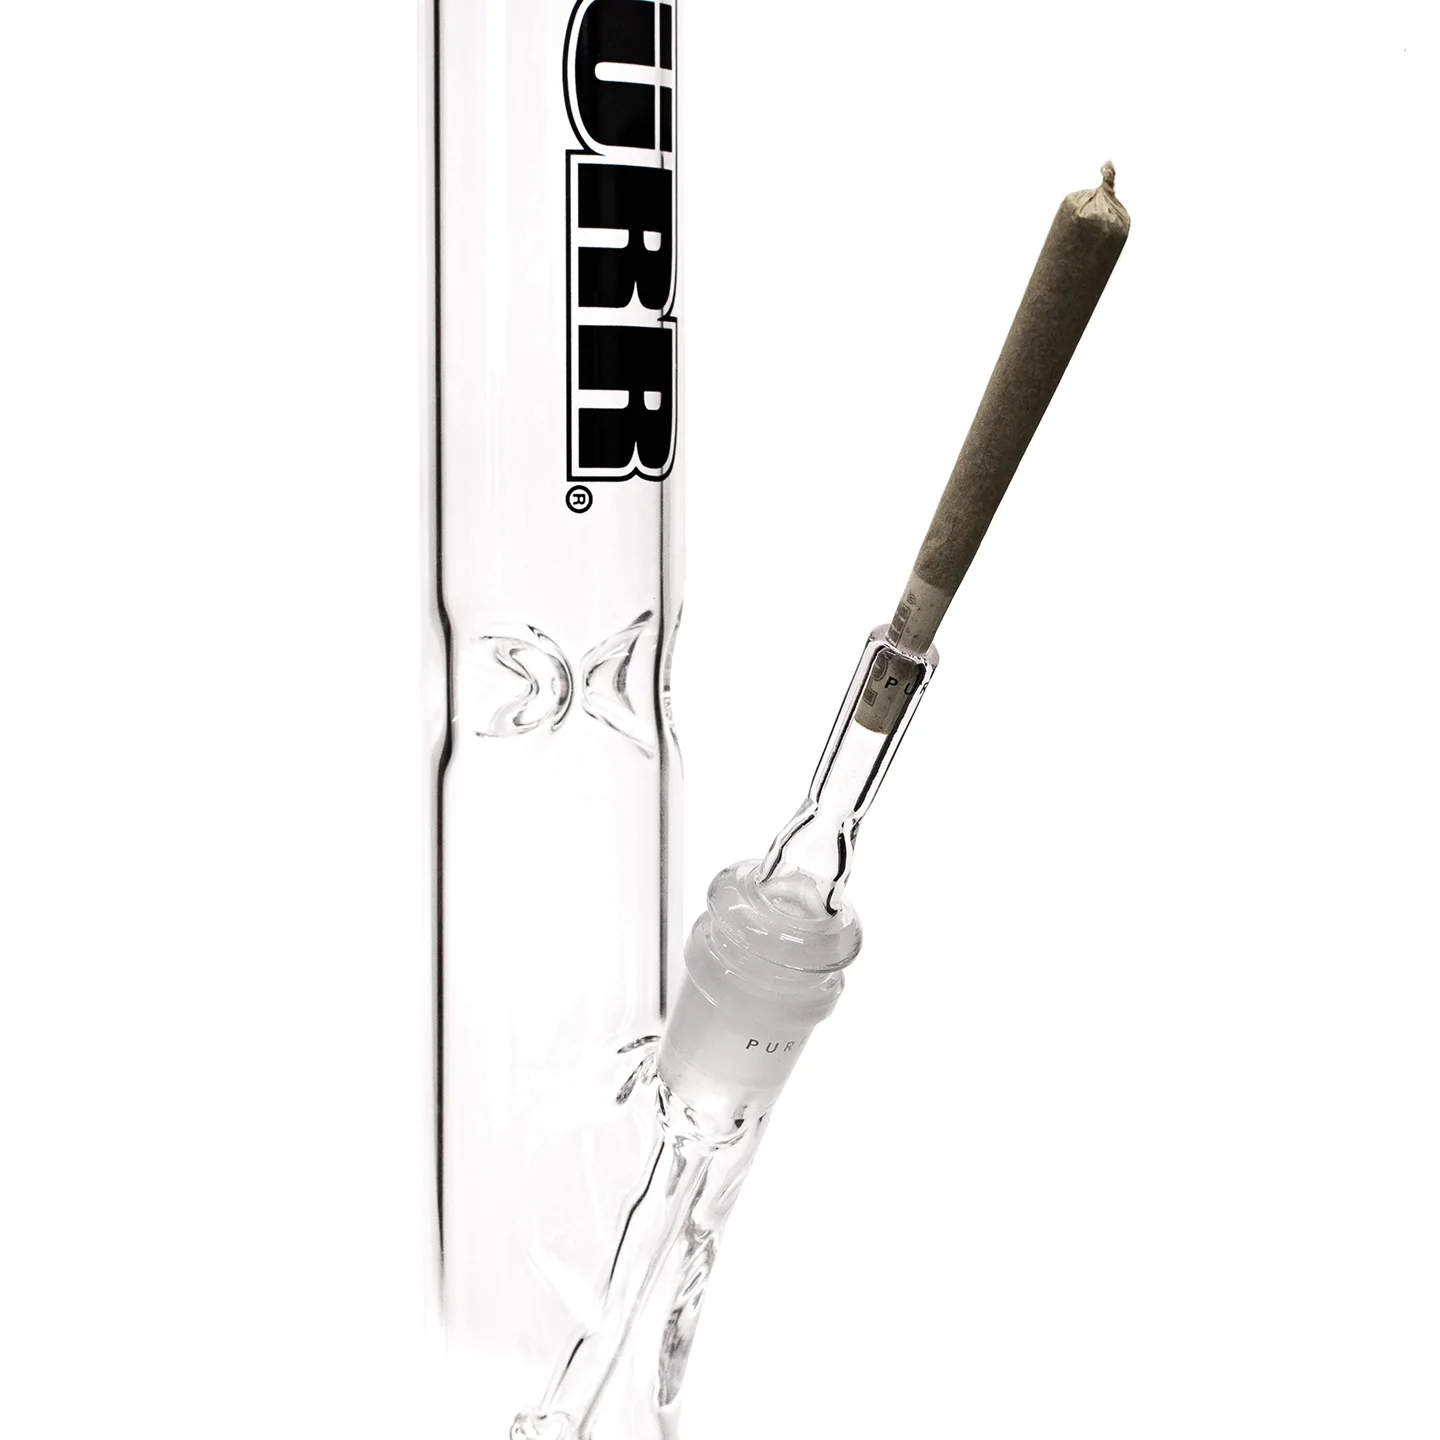 PURR 14mm Pre-Roll Glass Cone Adapter lateralus-glass